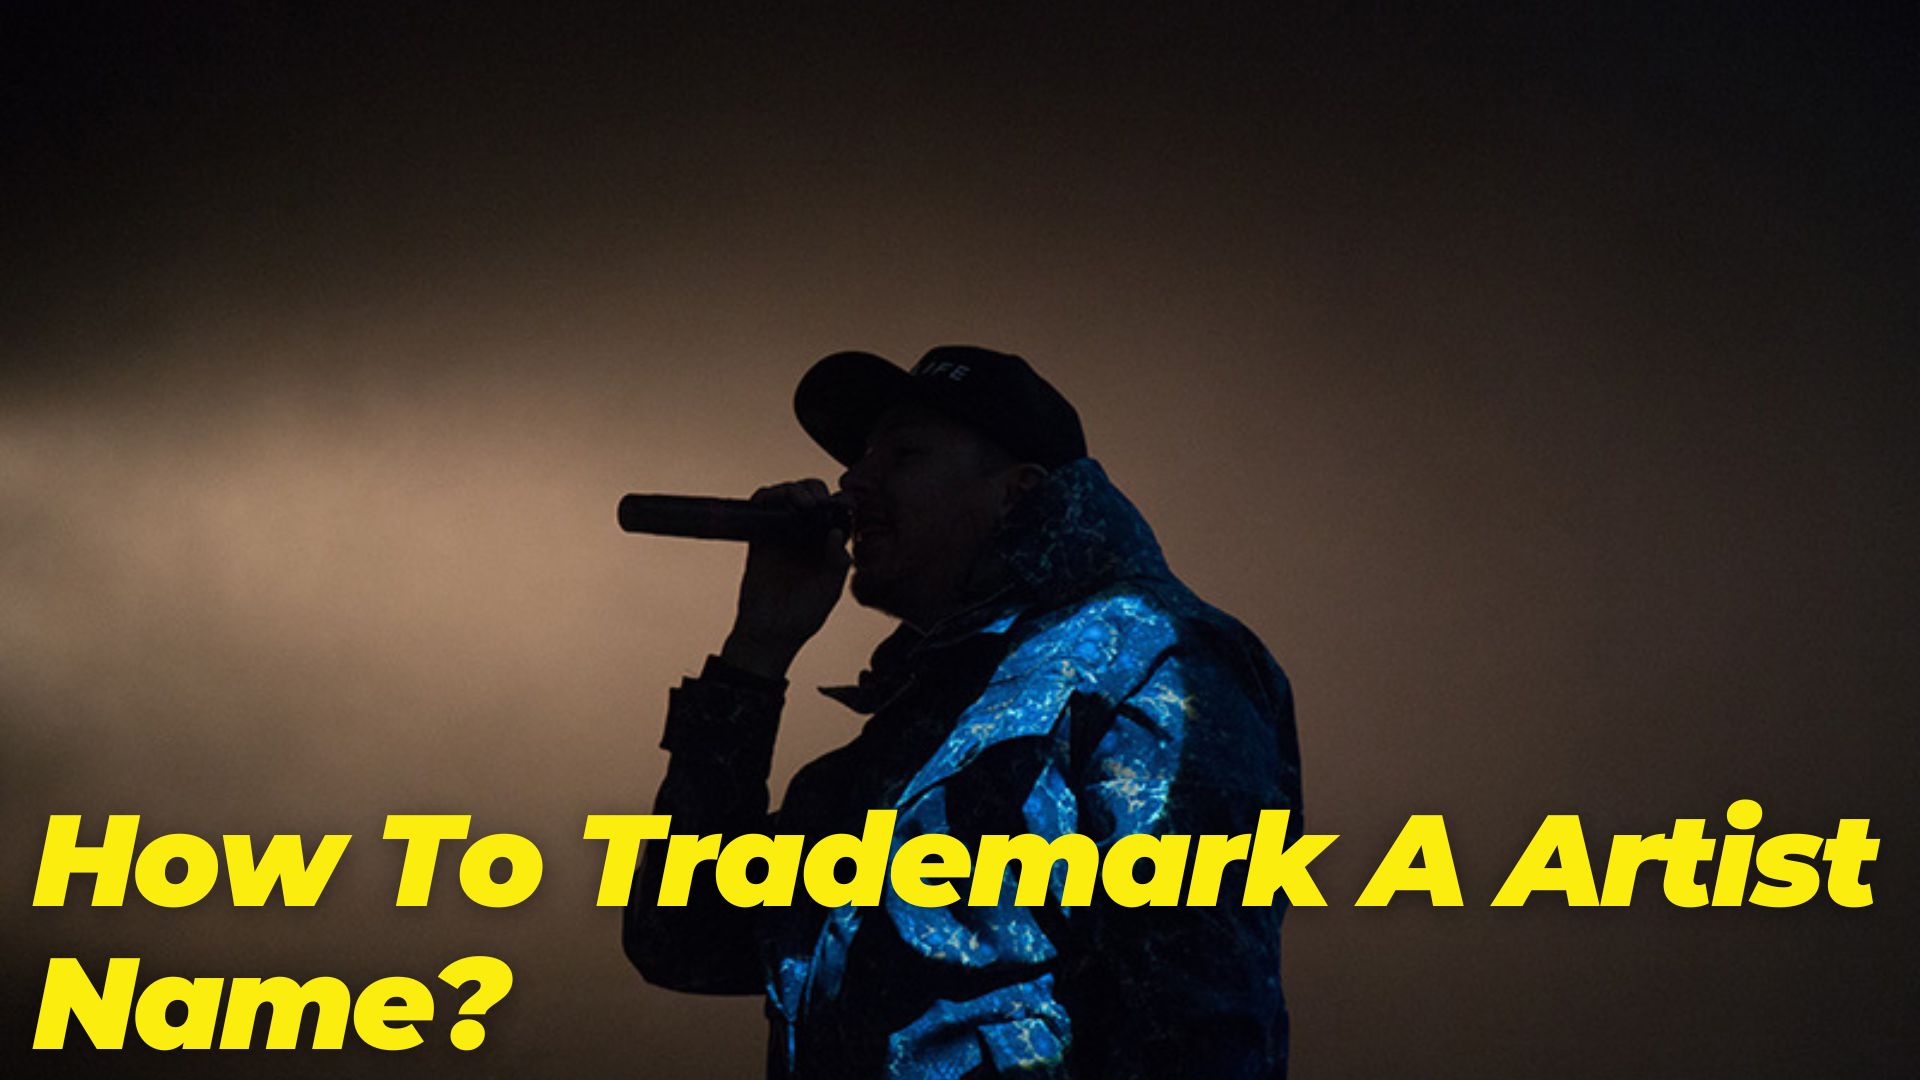 How To Trademark A Artist Name?